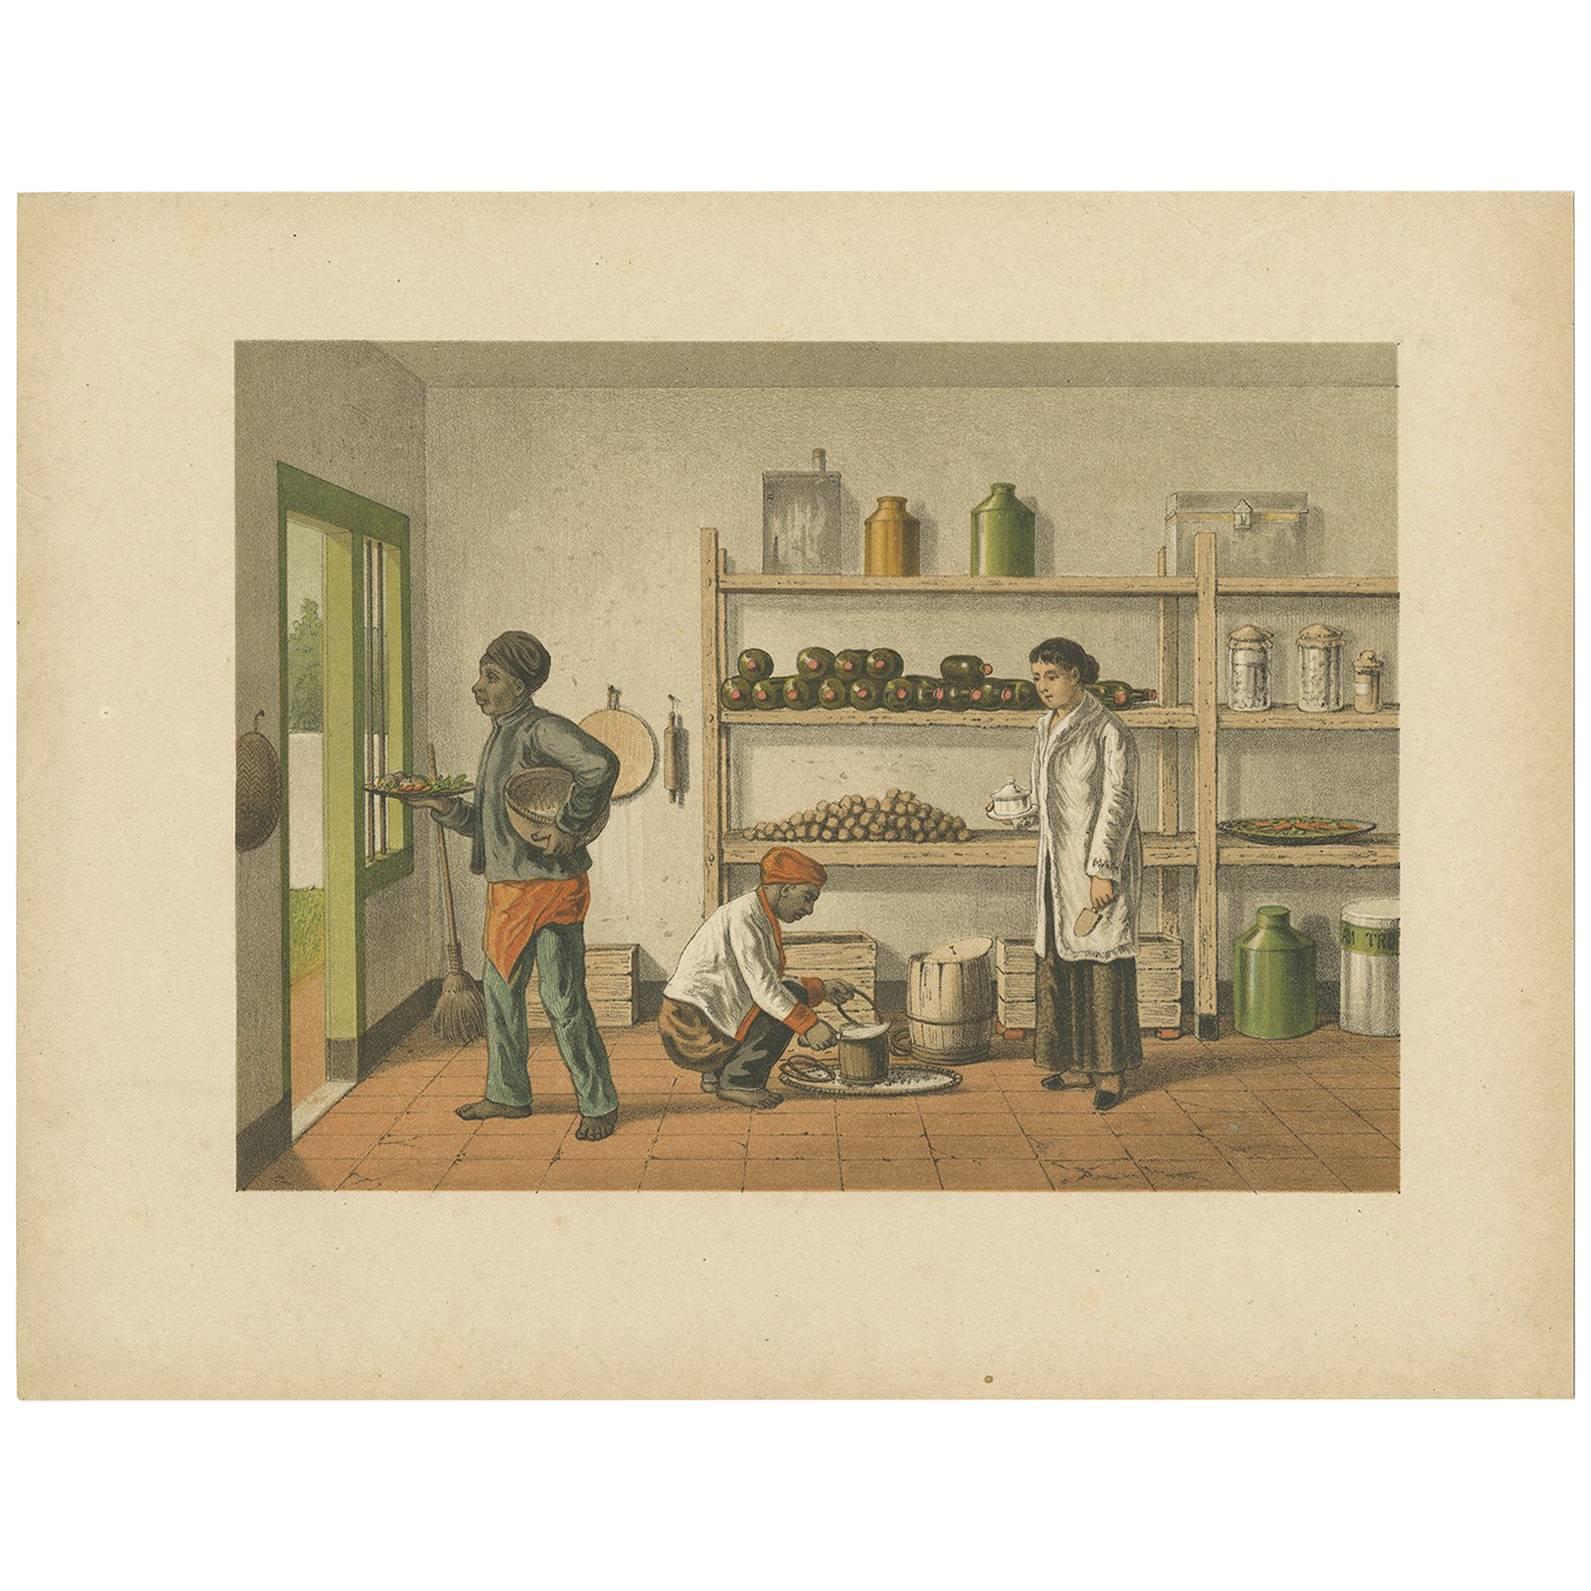 Antique Print of a Kitchen Storage in Batavia by M.T.H. Perelaer, 1888